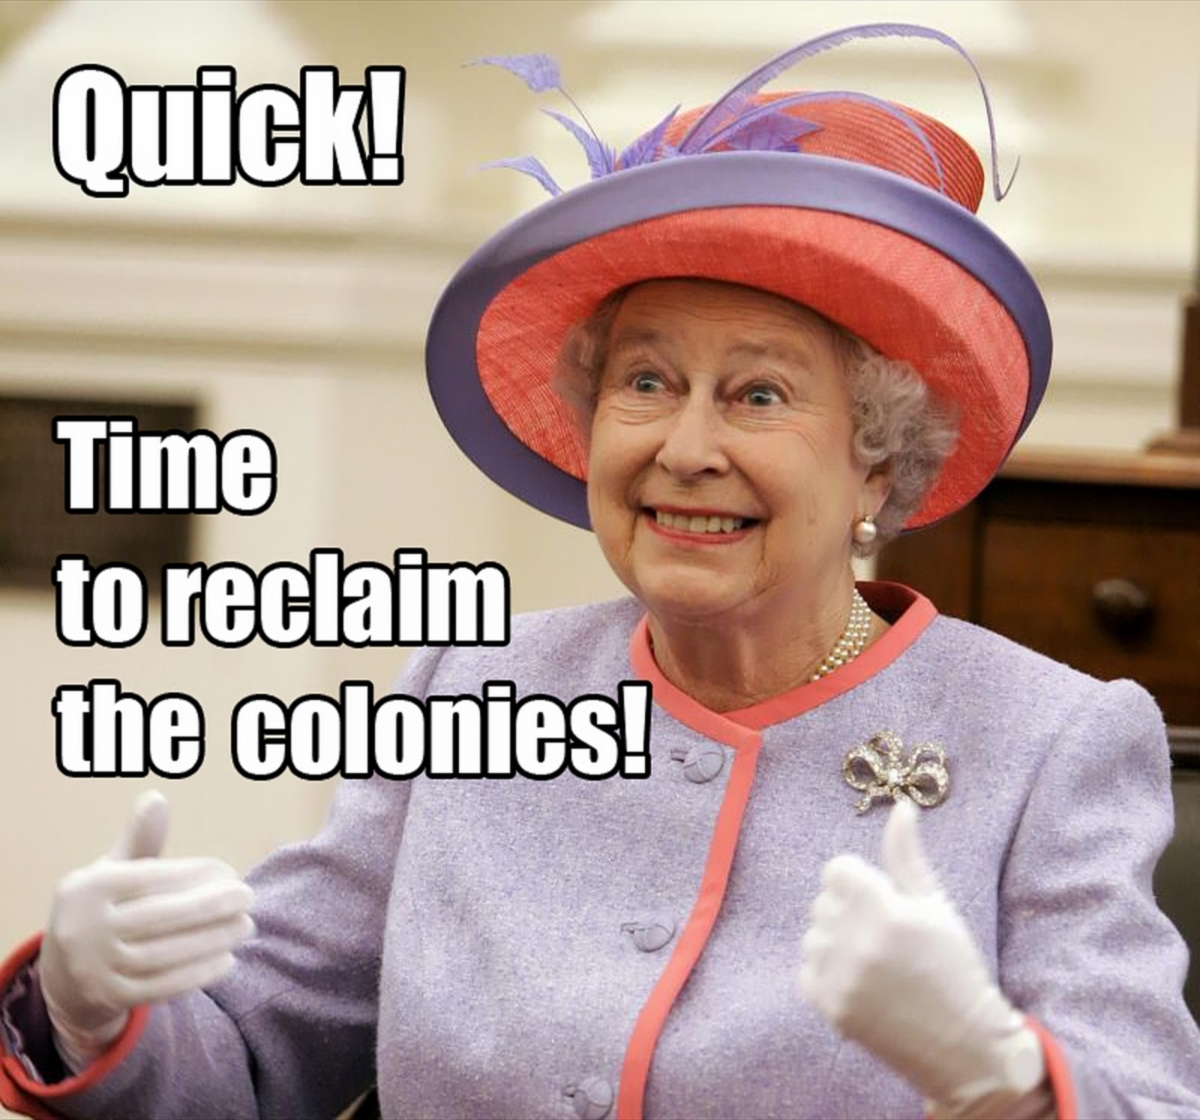 00-us-government-shutdown-01-time-to-reclaim-the-colonies-04-10-131.jpg